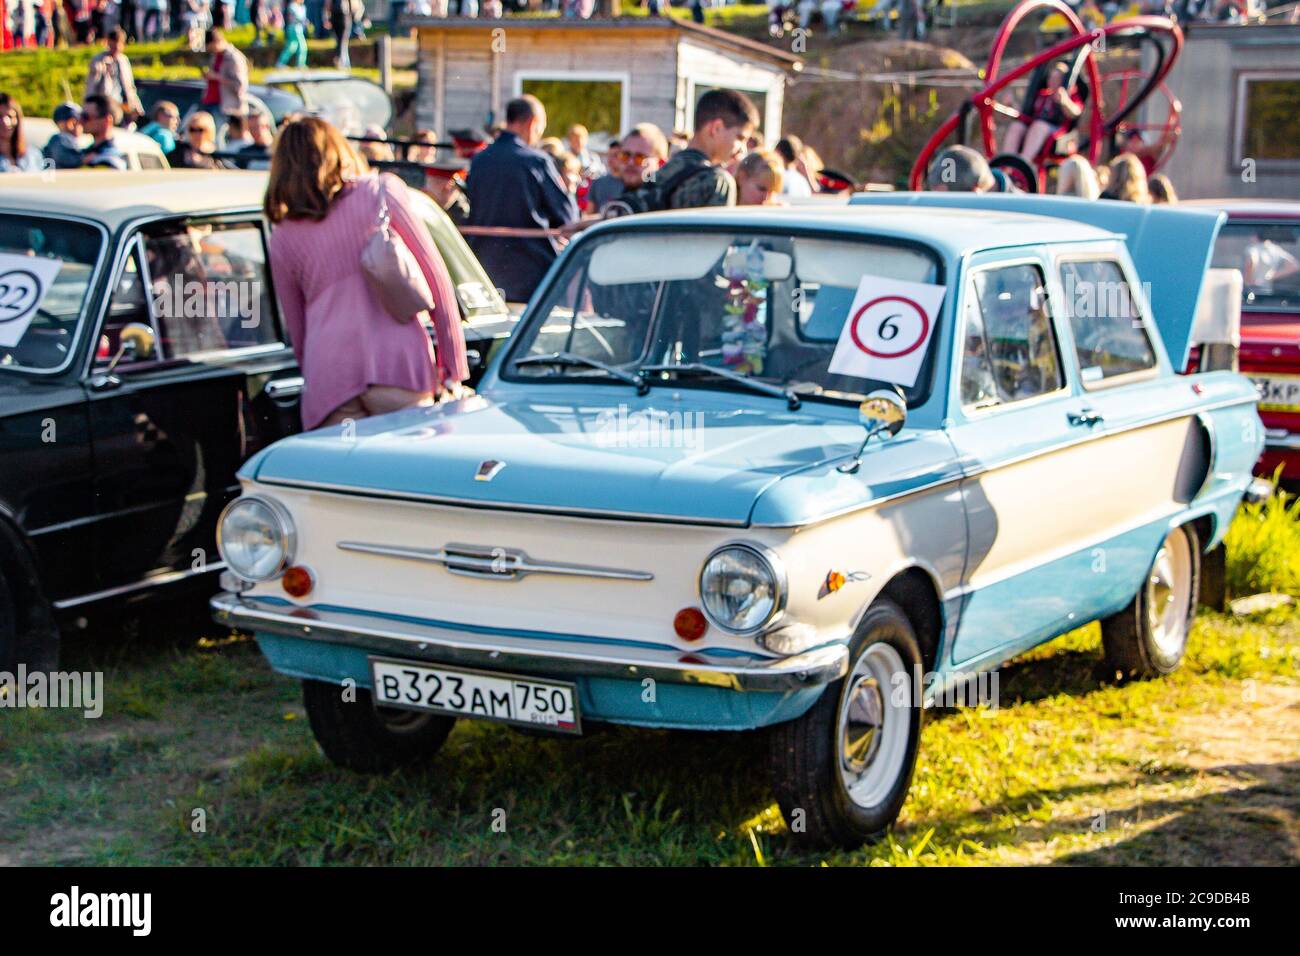 Tver, Russia - 07. September 2019: Demonstration of retro cars in the open air. Festival of vintage cars. Stock Photo